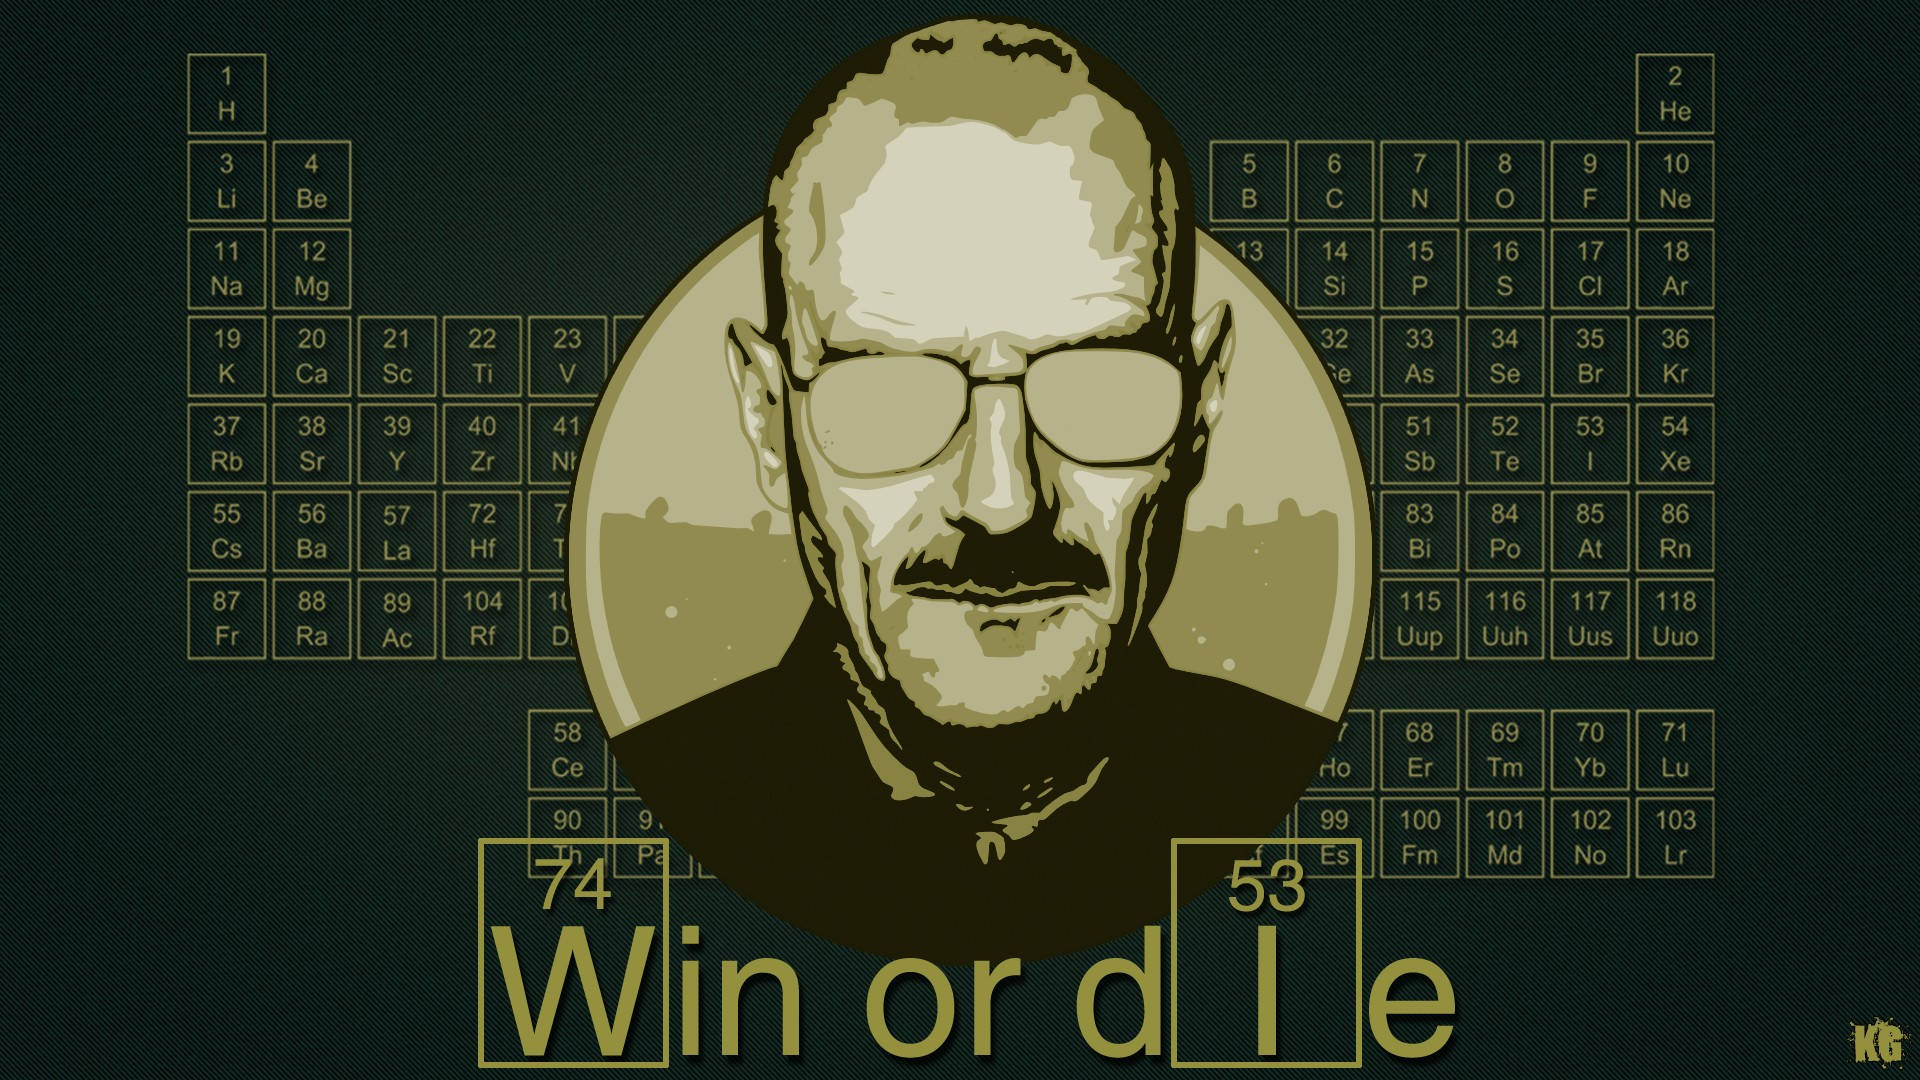 Get your own periodic table of Breaking Bad elements! Wallpaper